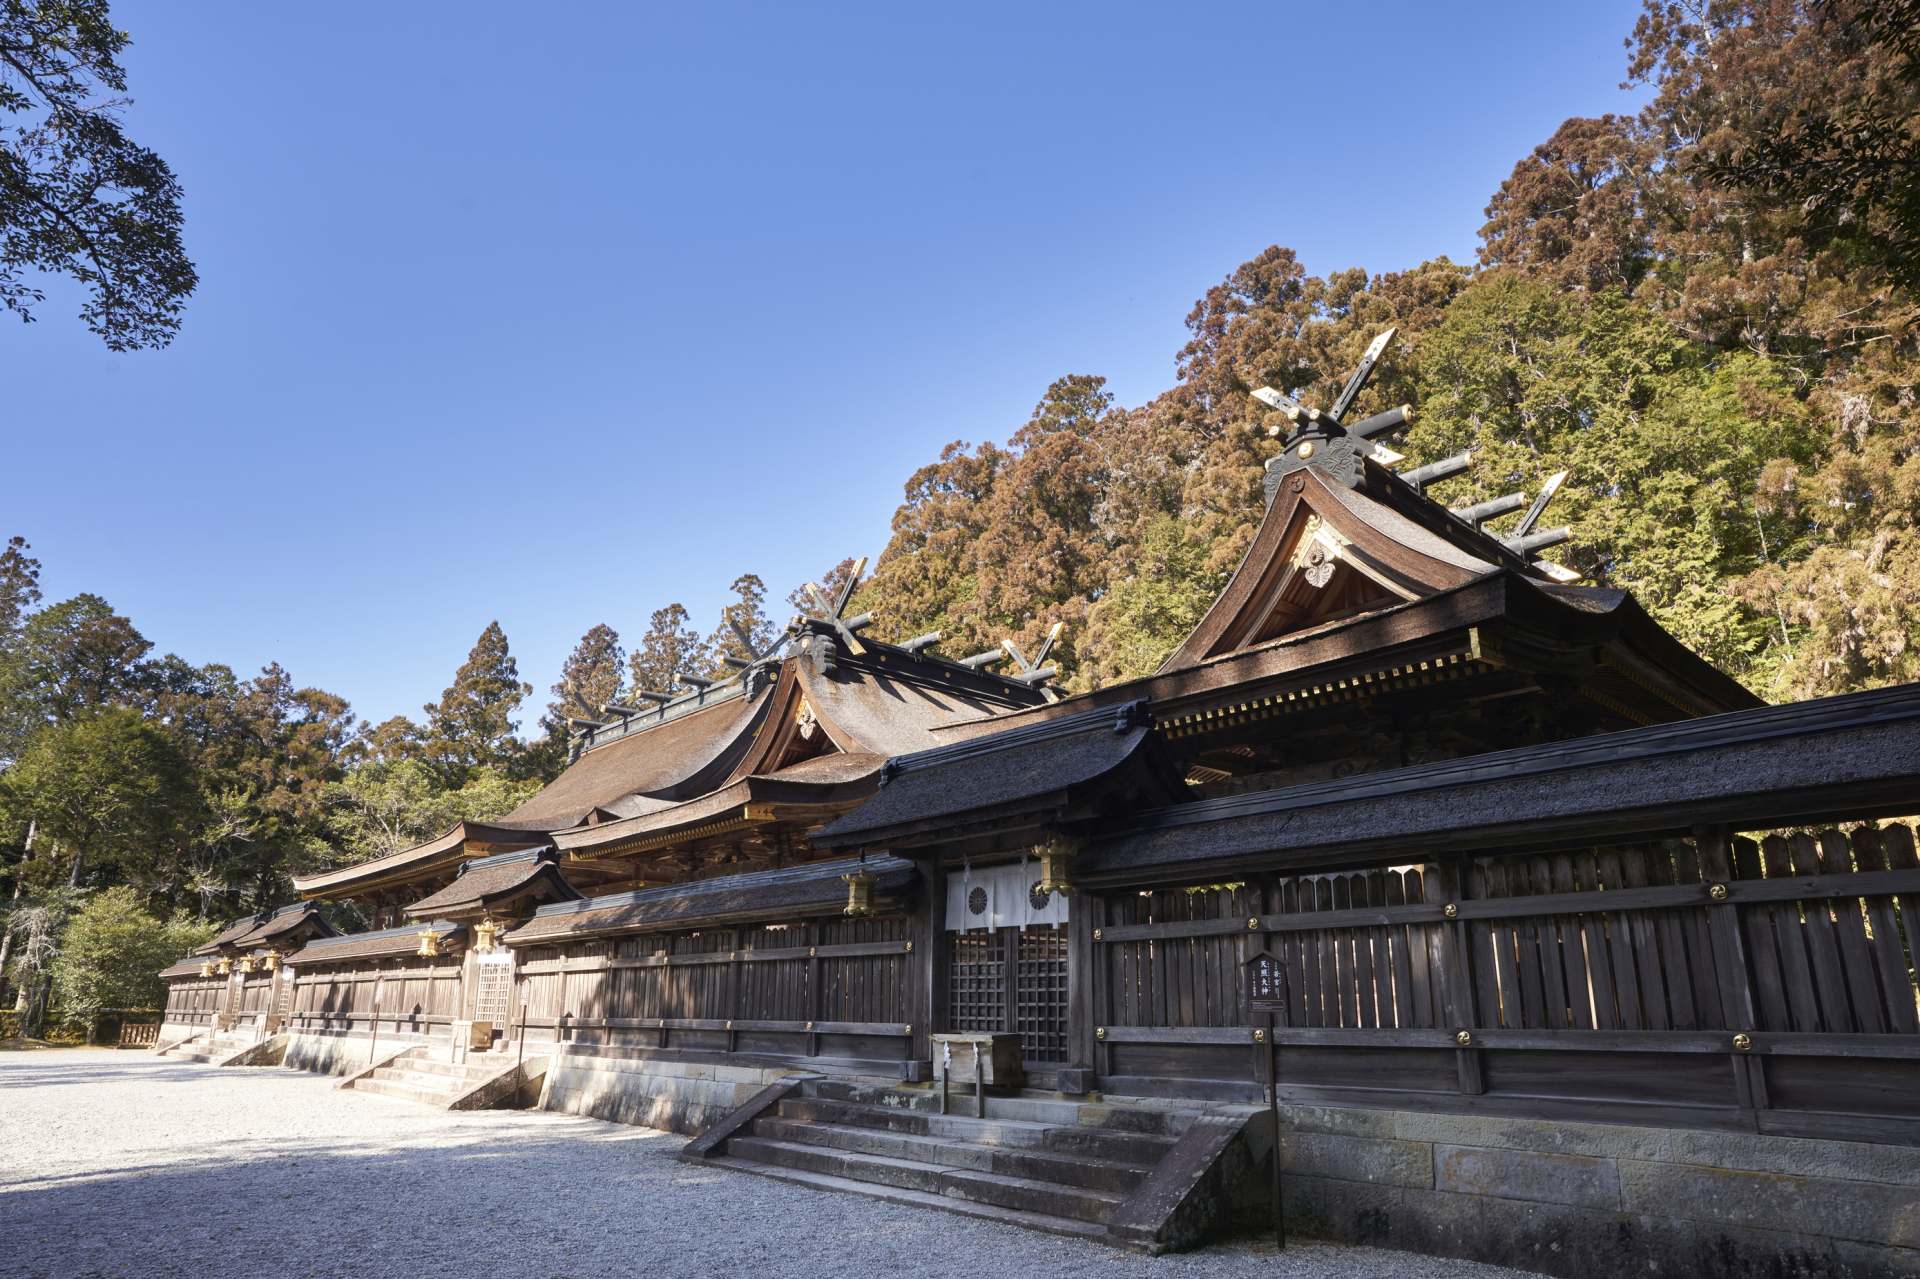 With a magnificent forest behind it the shrine buildings are built in the gongen-zukuri style with hinoki cypress roofs. 
The main hall is not the largest, but the third gate to the right called the Shojo-den.